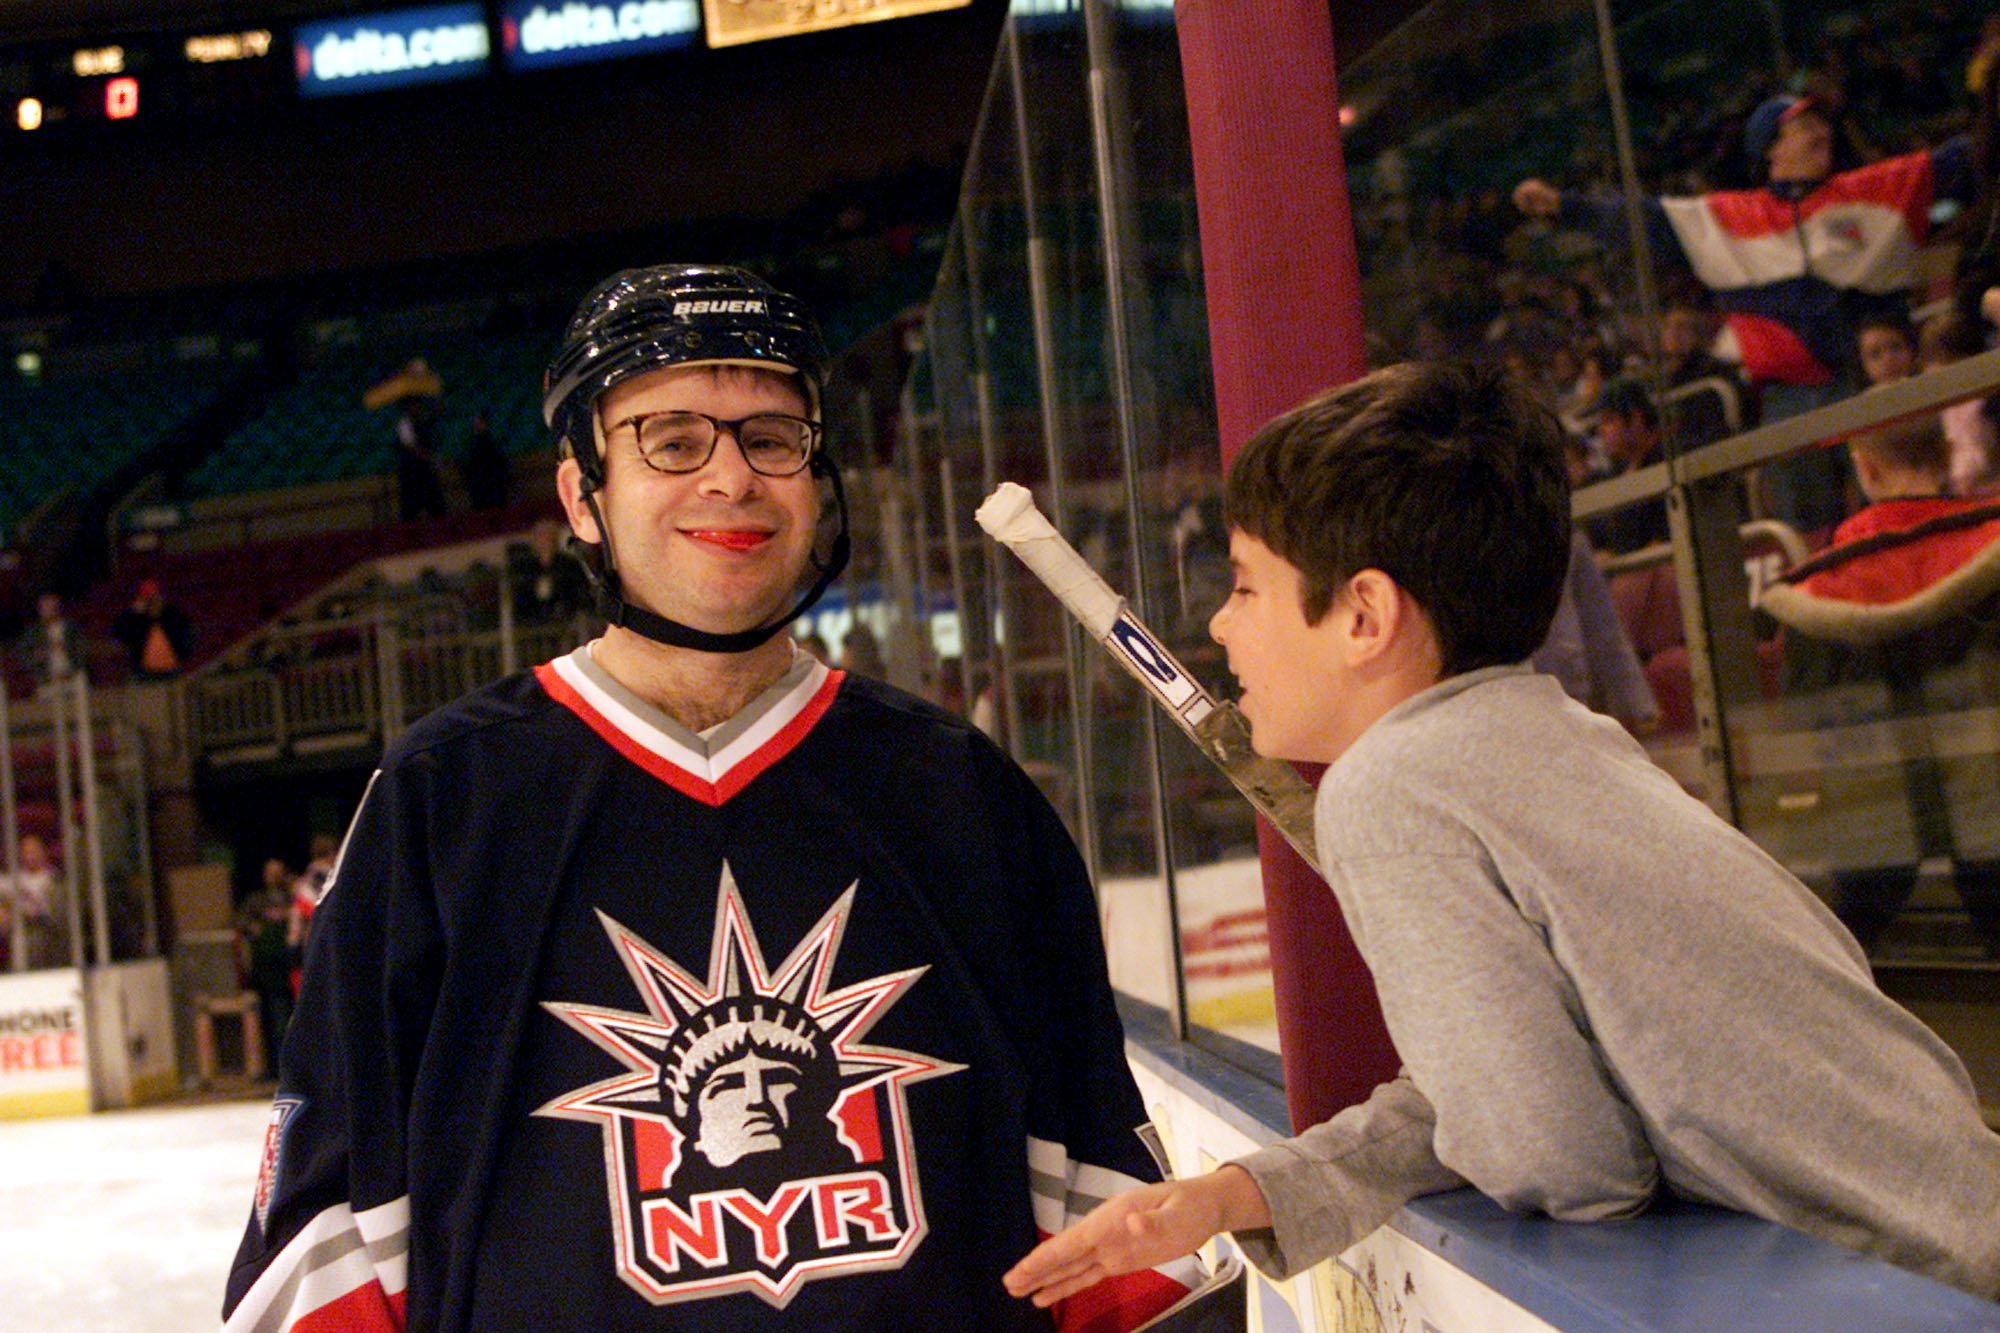 Comedian Rick Moranis pictured with his son Mitchell at the Superskate 2001 charity hockey event at Madison Square Garden on January 7, 2001 in New York City. | Source: Getty Images